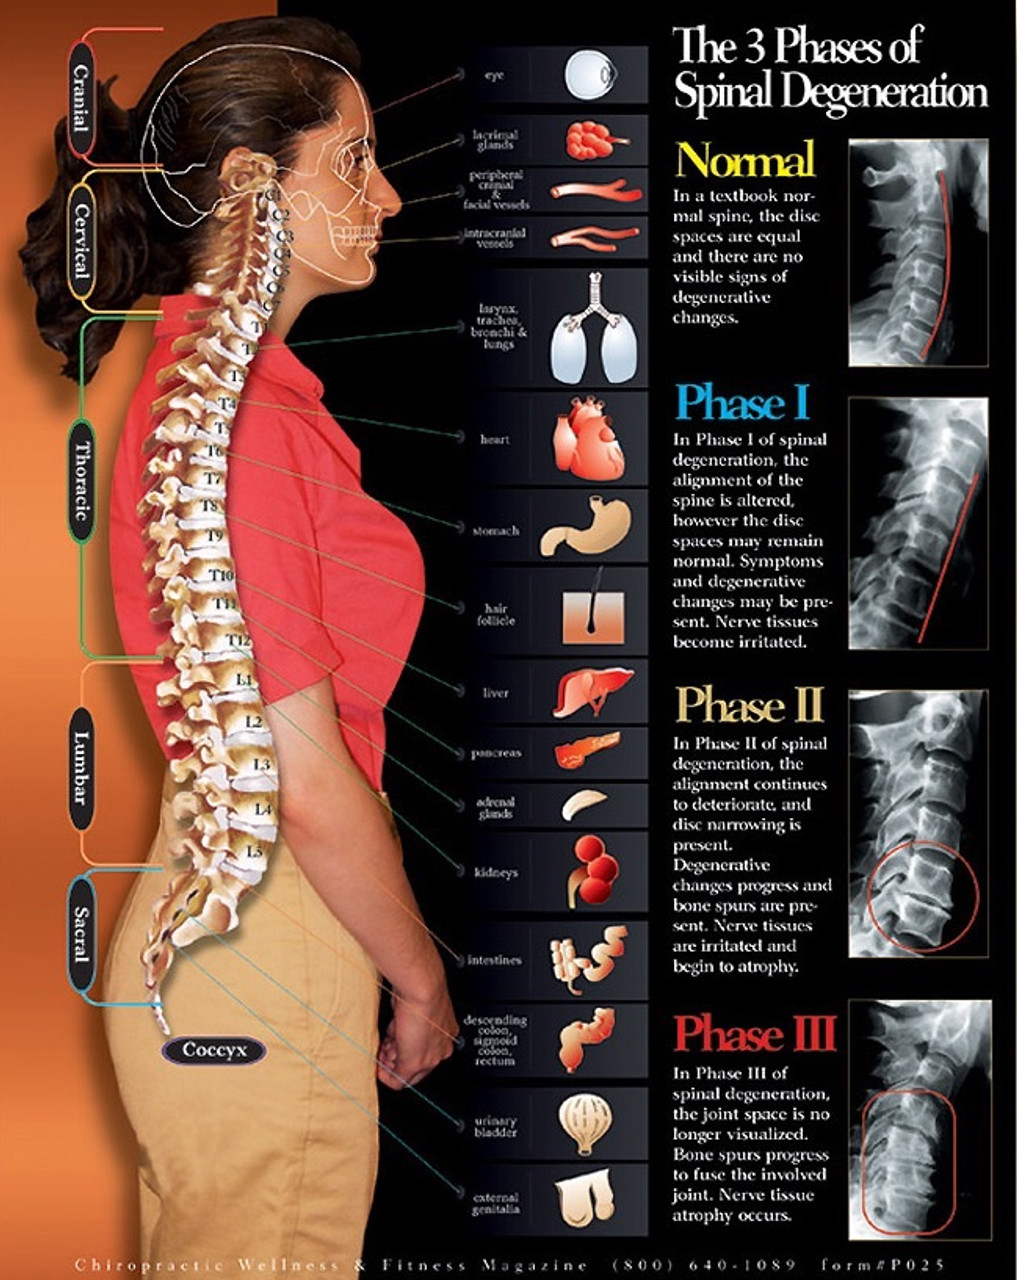 What is the best treatment for degeneration of the spine?